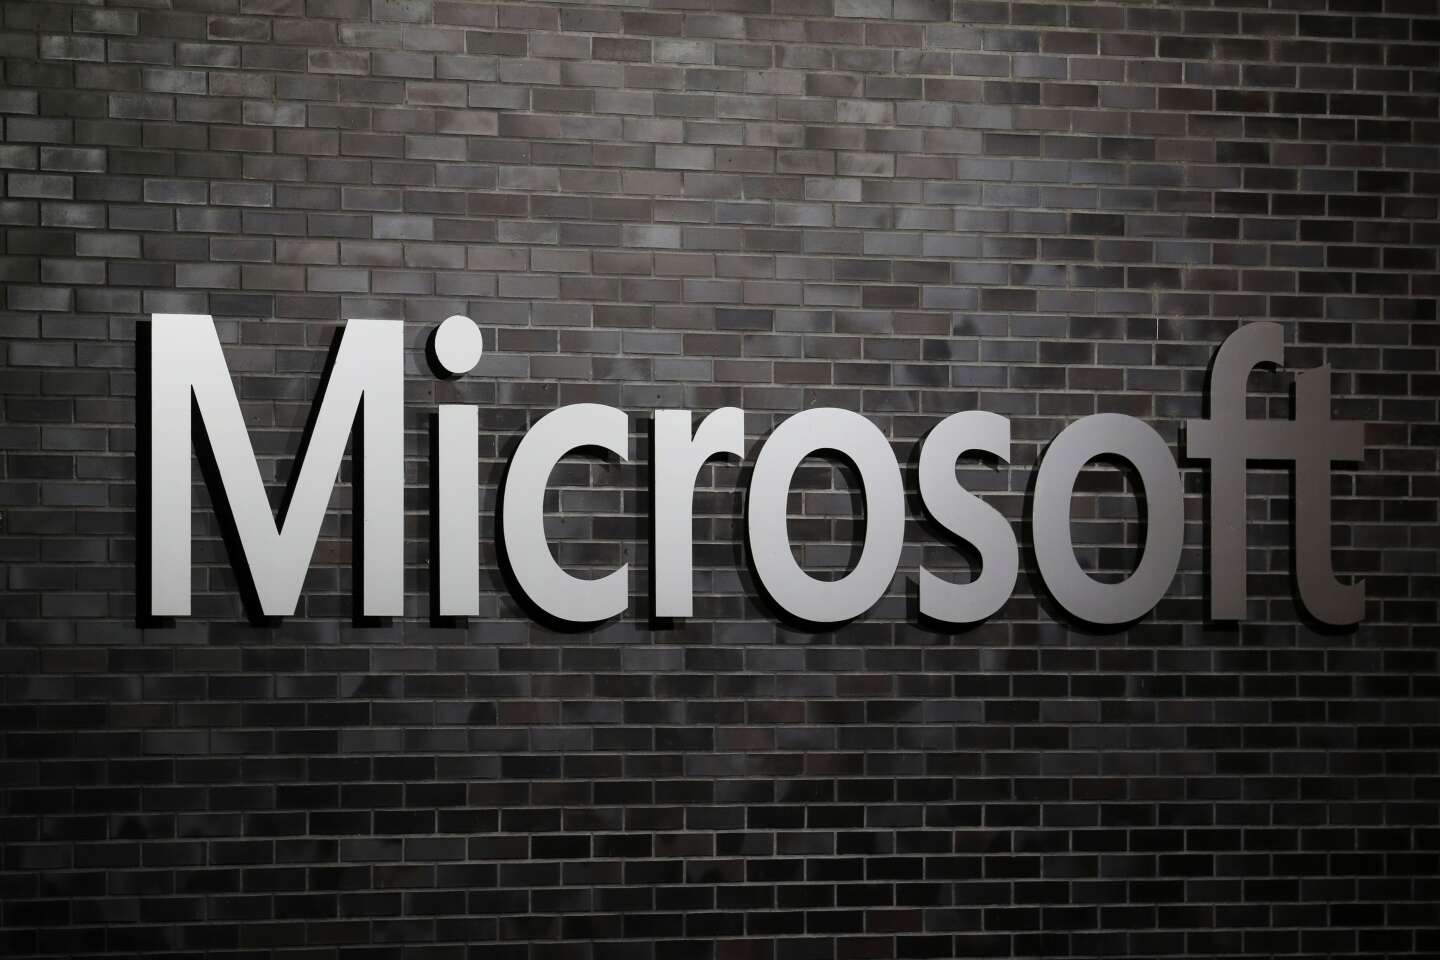 Microsoft announces the integration of GPT-4 technology in its Word, Excel, Outlook and Teams tools